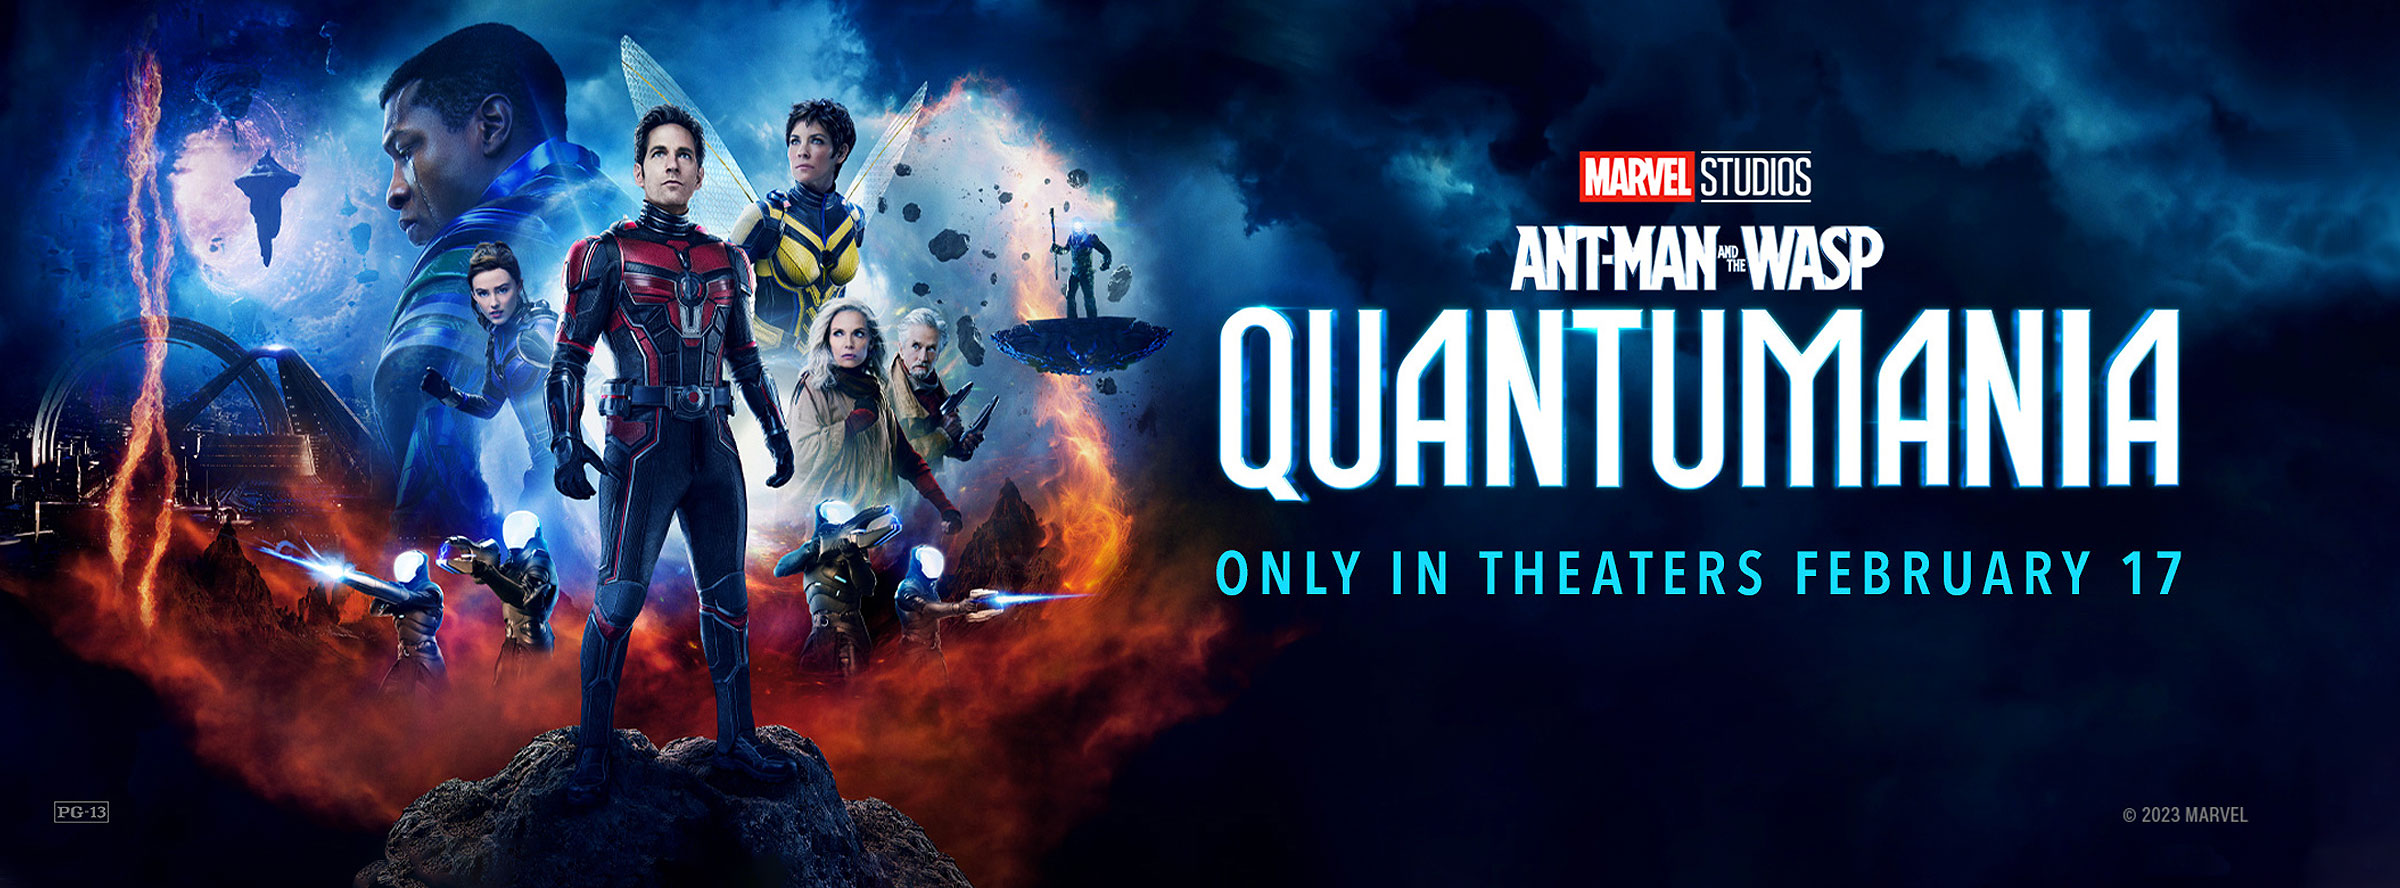 Slider Image for Ant-Man and the Wasp: Quantumania